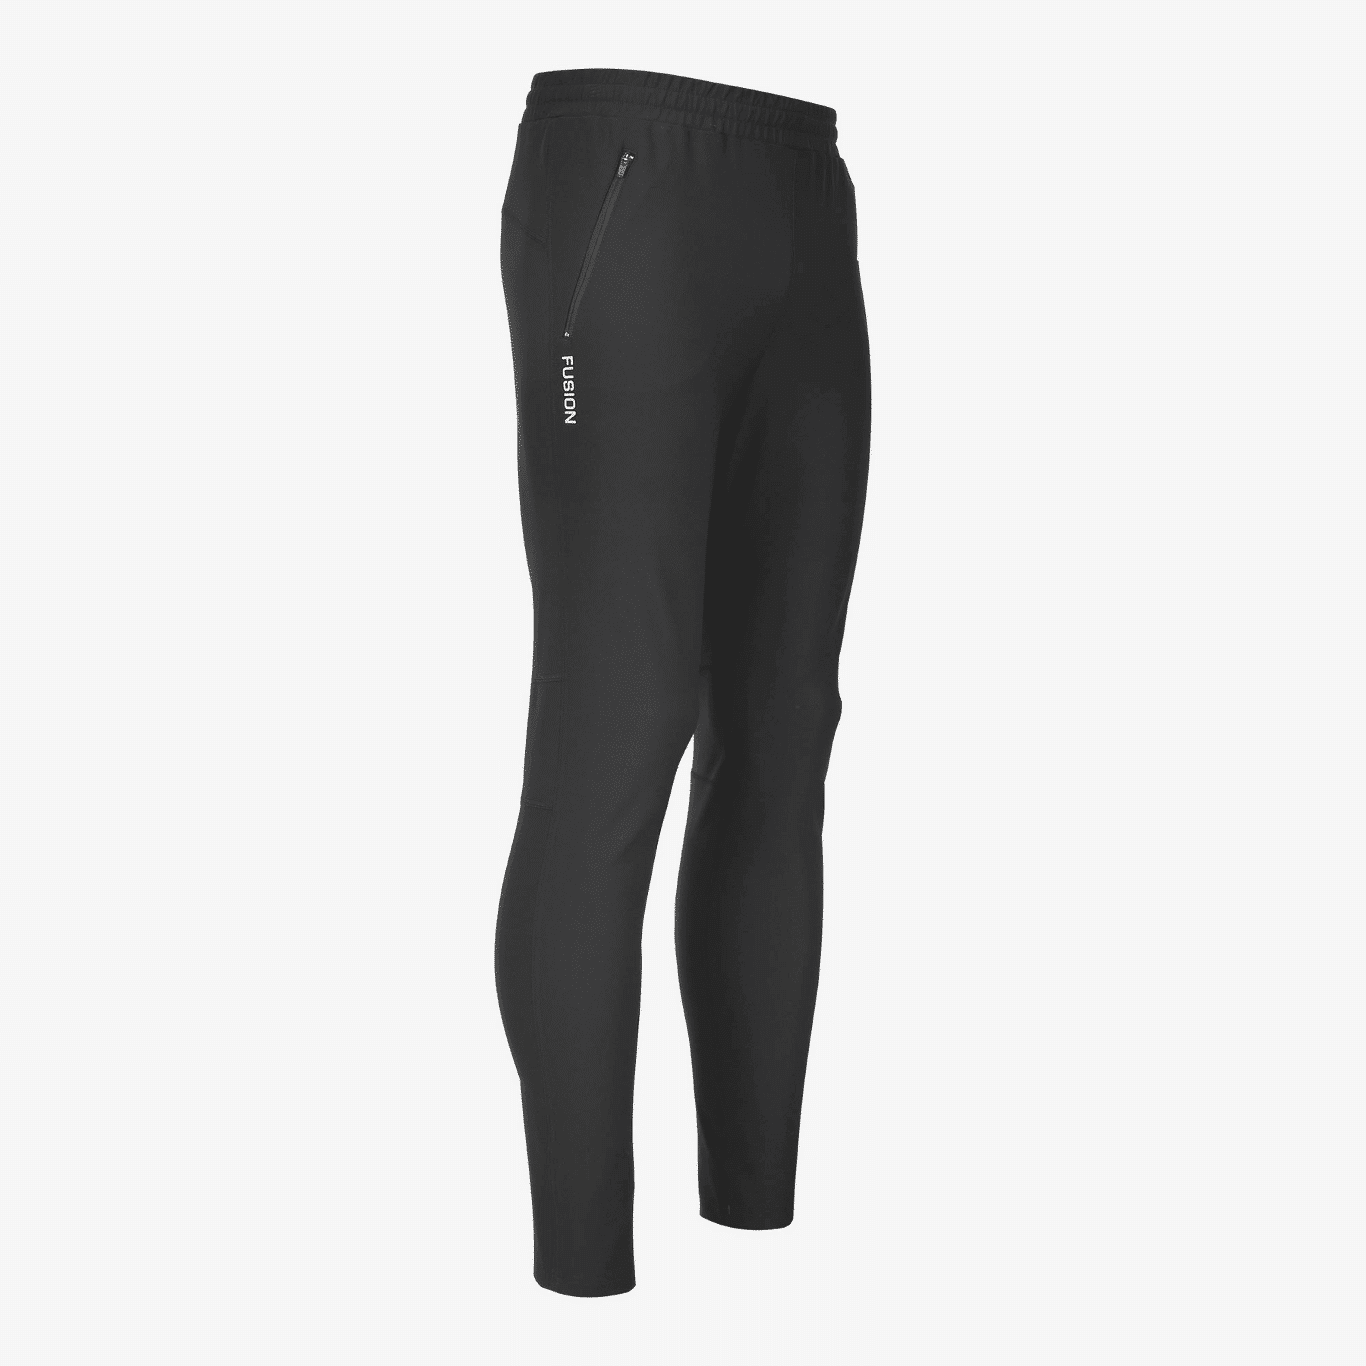 Review: Fusion Merino Longsleeve, Recharge Pants And C3 Hot Tights